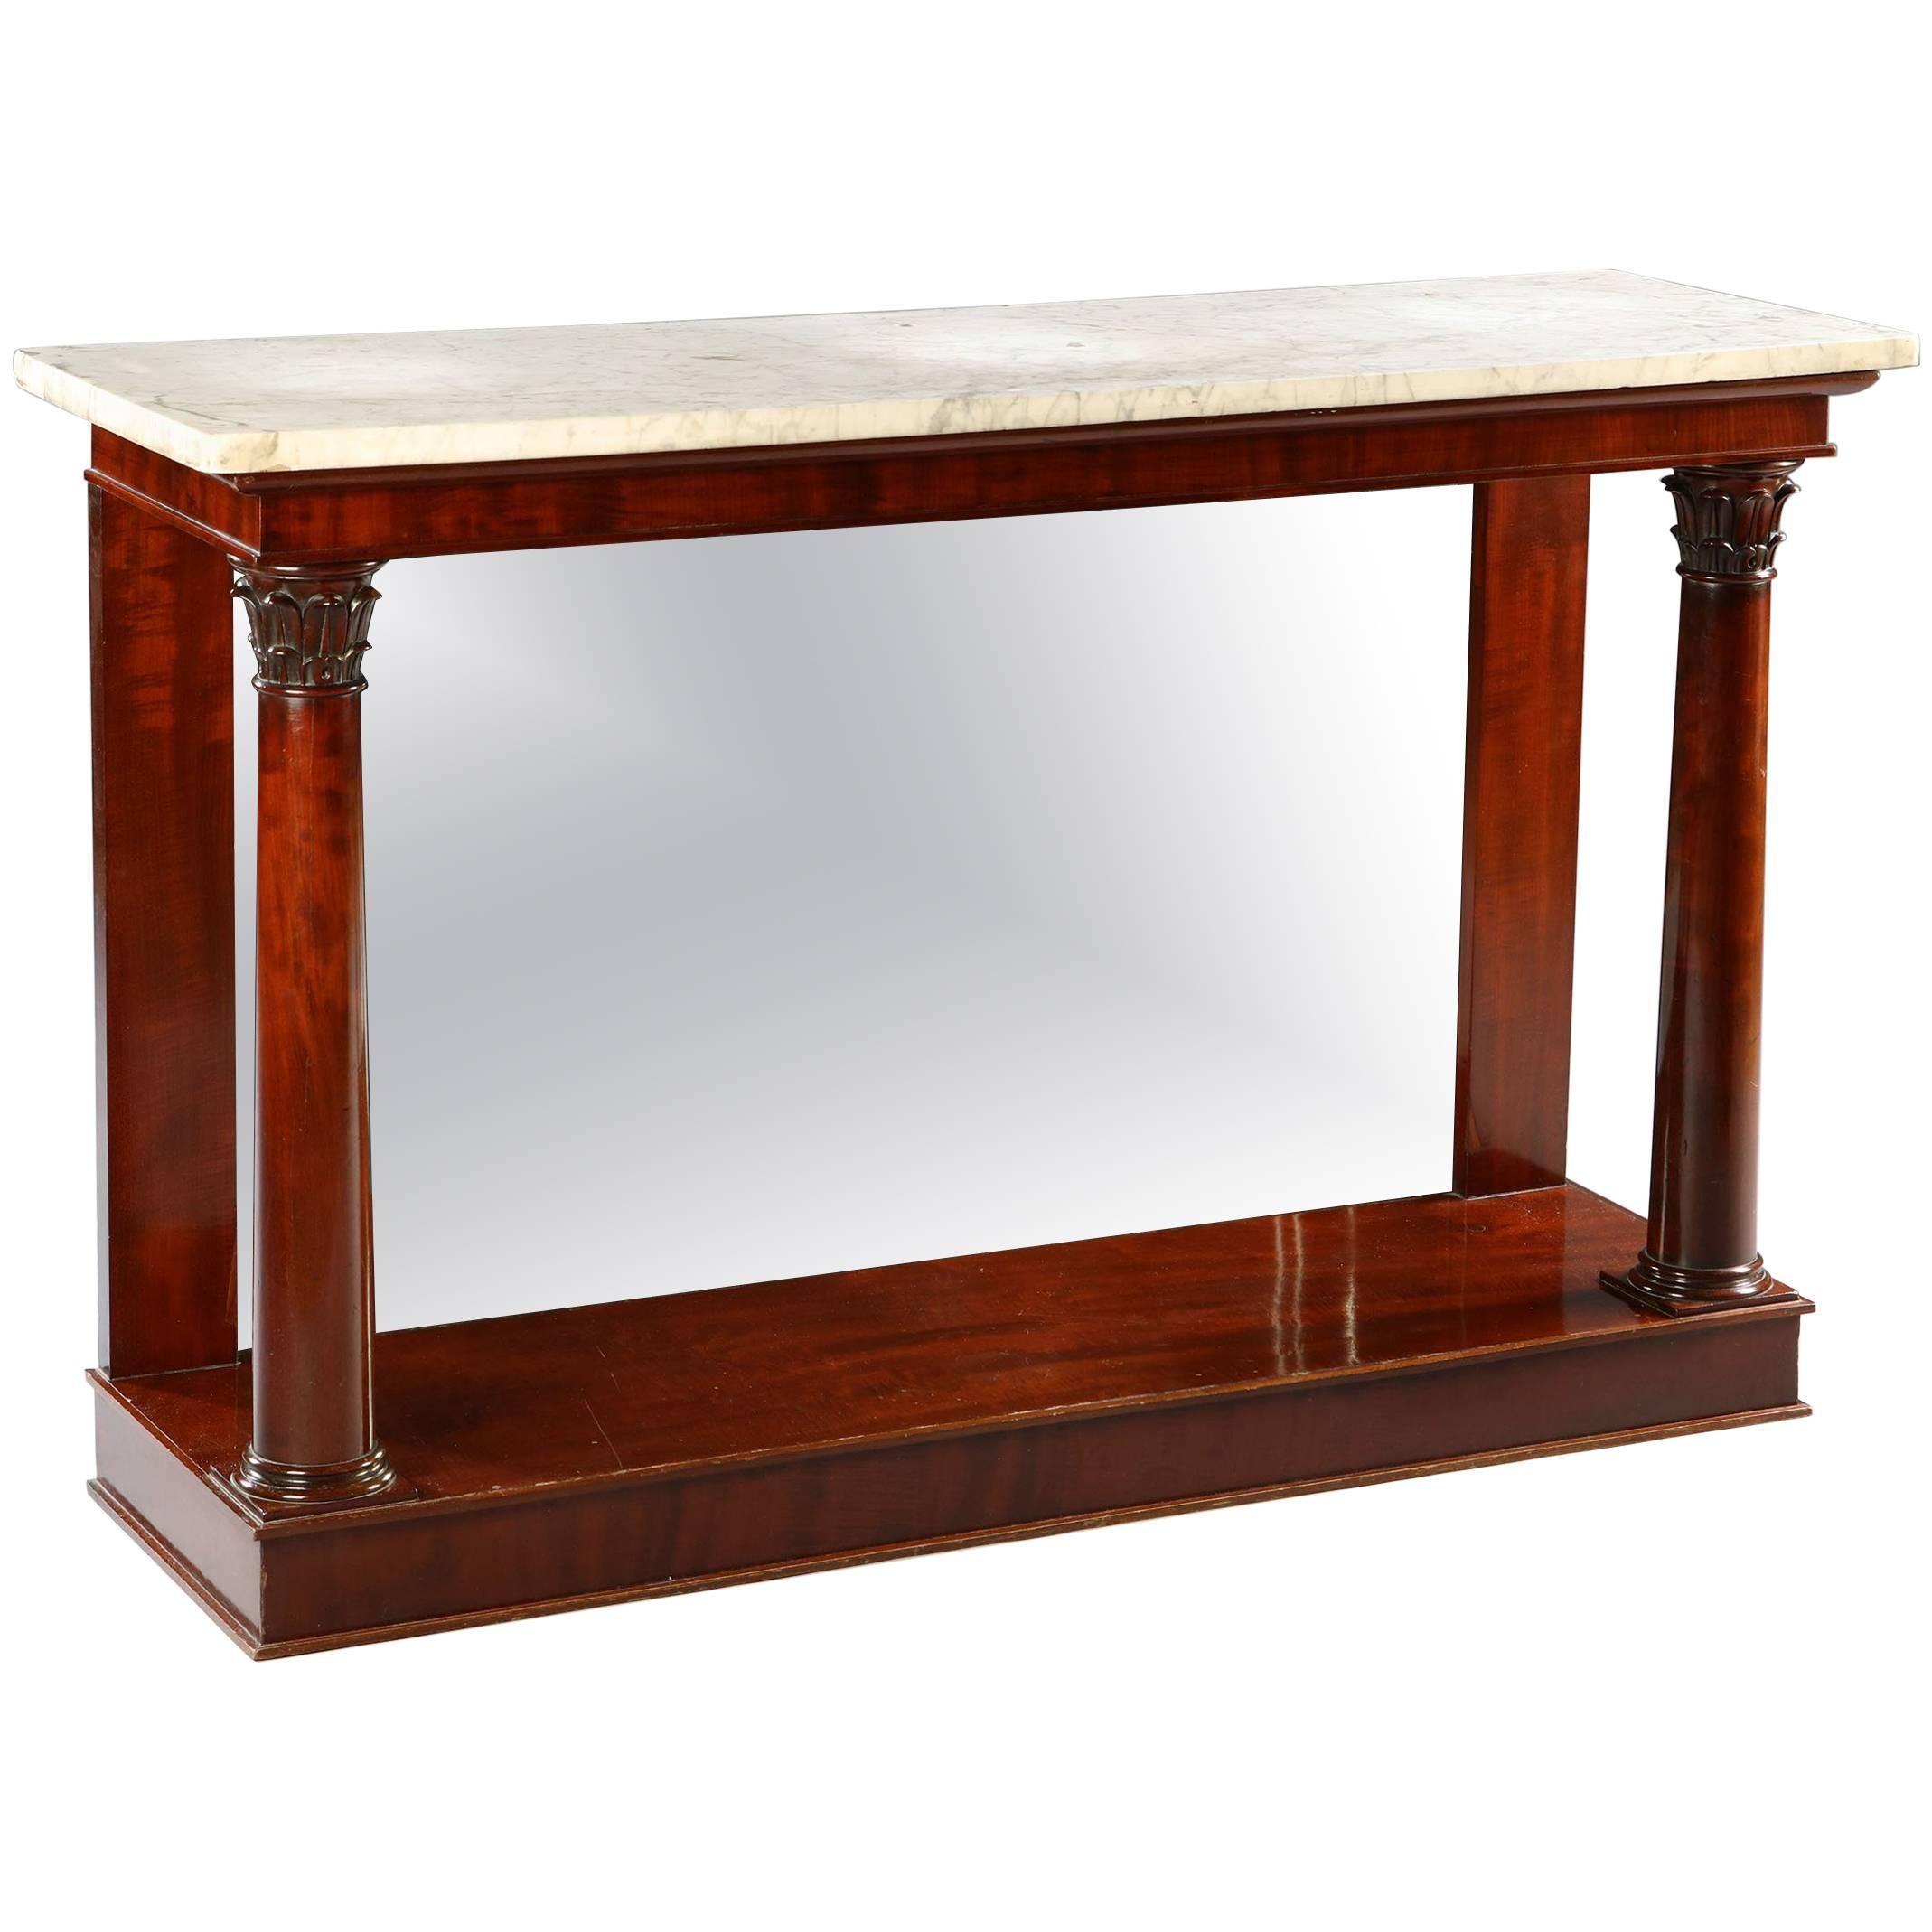 Early 19th Century Console Table